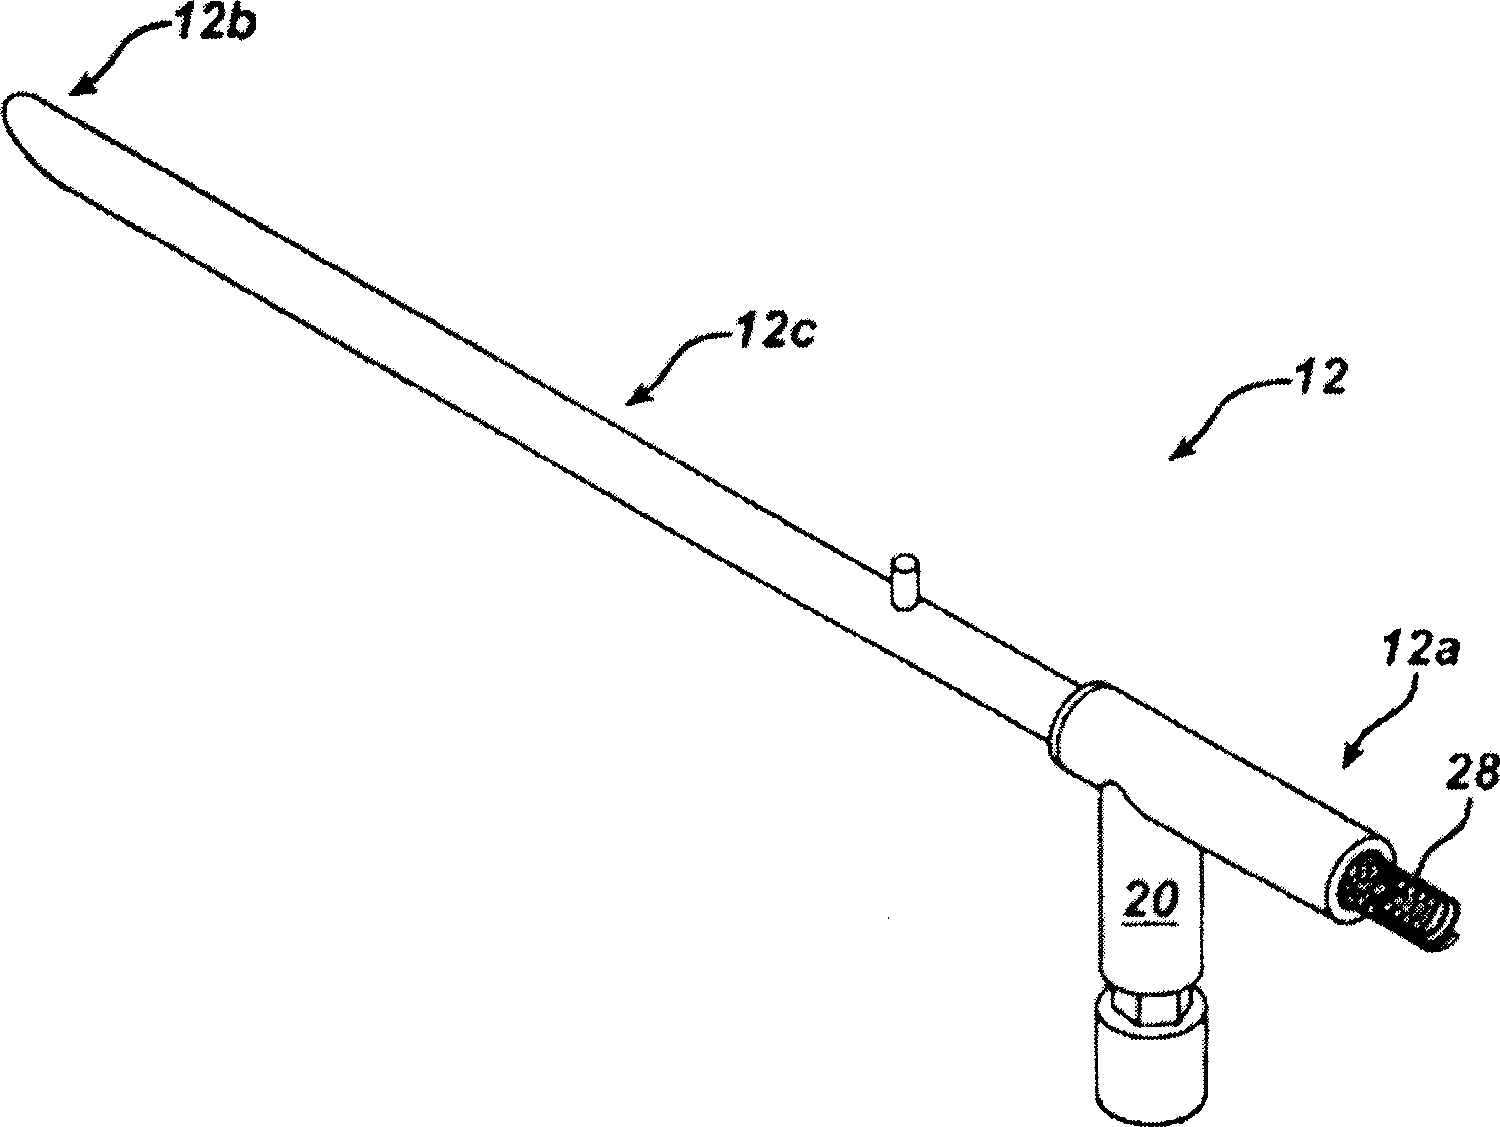 Tissue extraction and collection device